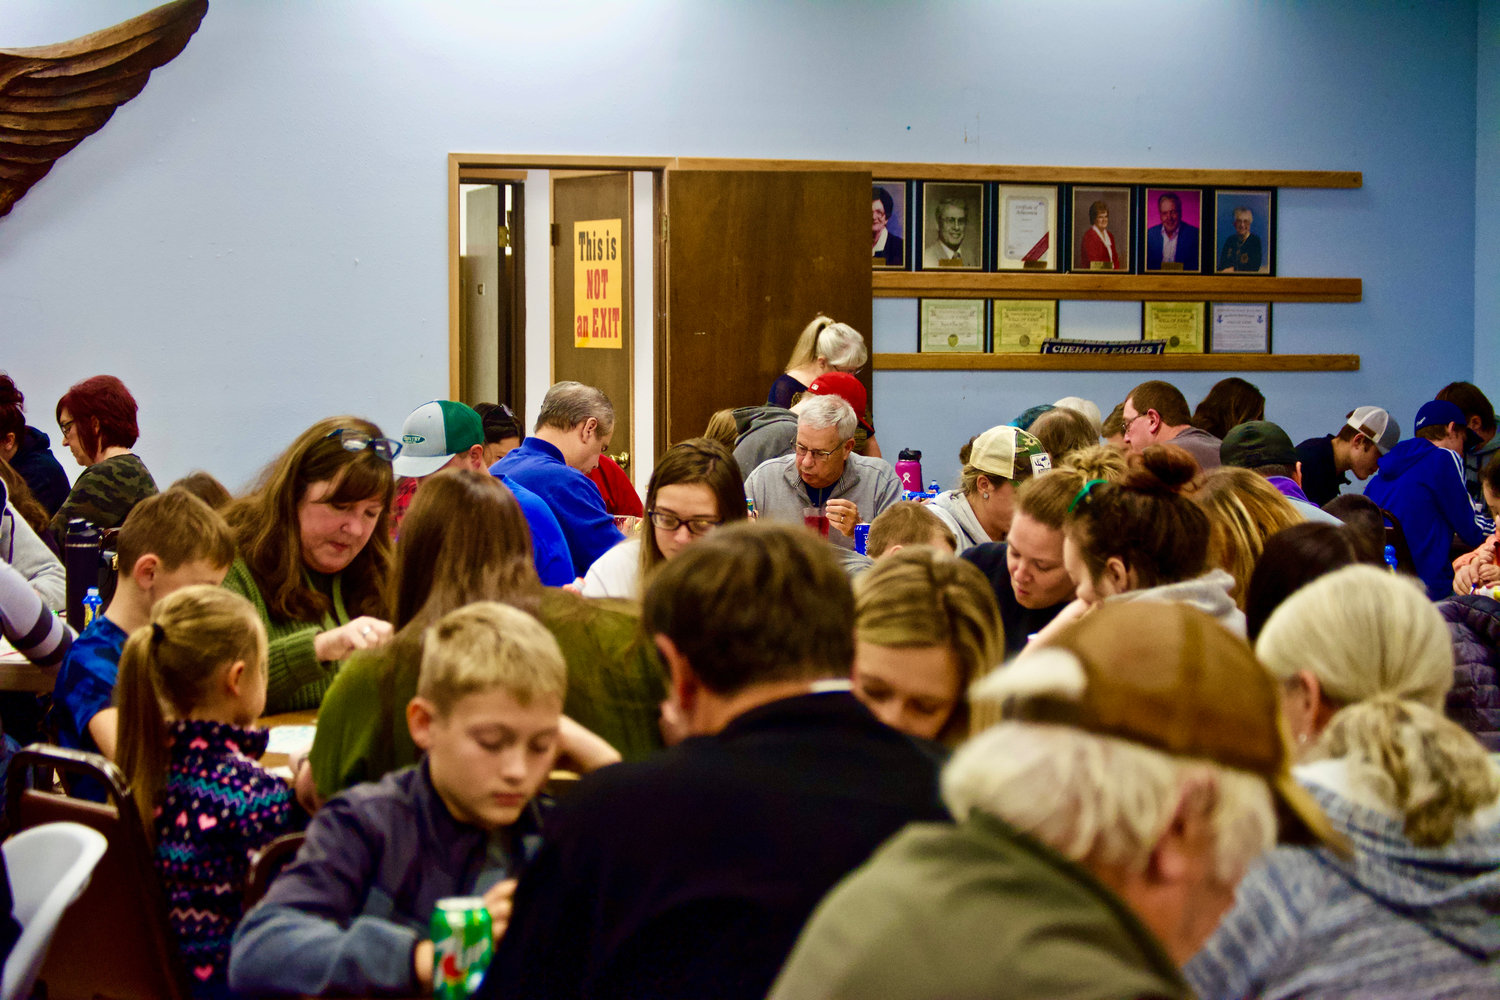 The Chehalis Eagles event space was packed to standing-room only on Saturday from 4 to 6 p.m. for the Twin Cities Rotary Club’s annual turkey bingo event.